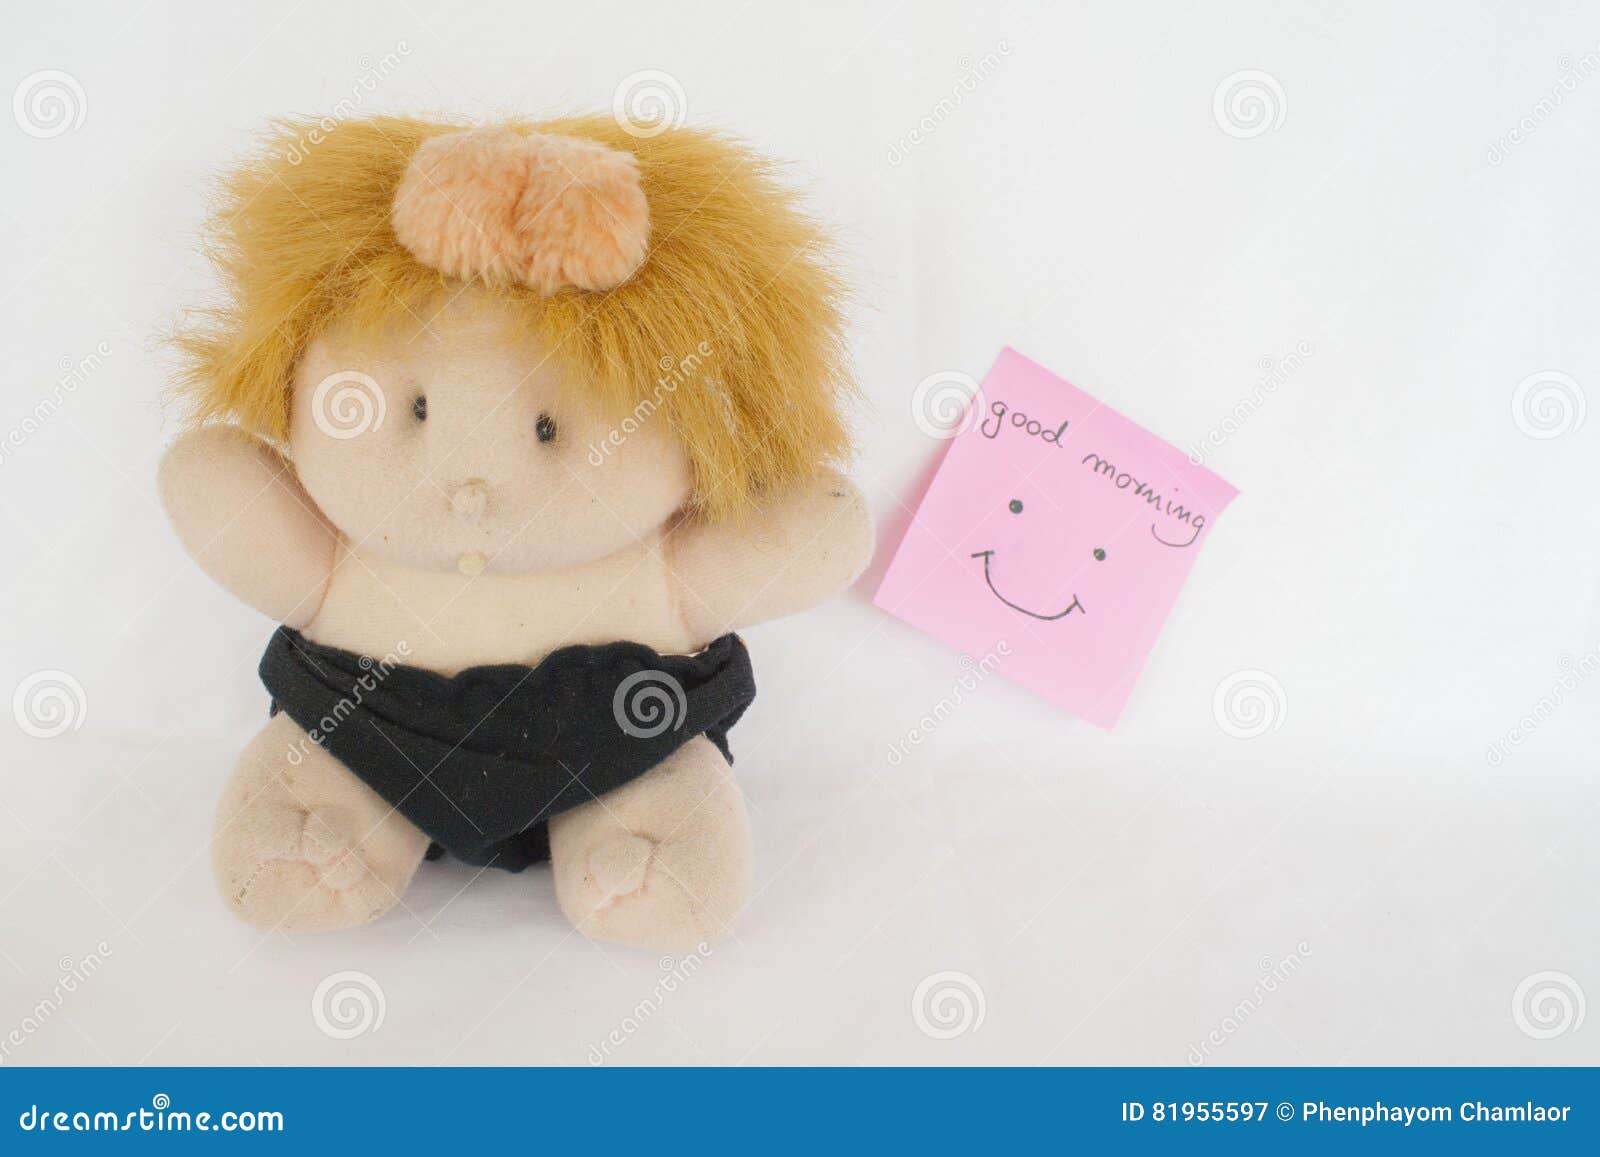 Messages Card and Baby Doll Stock Image - Image of passage ...